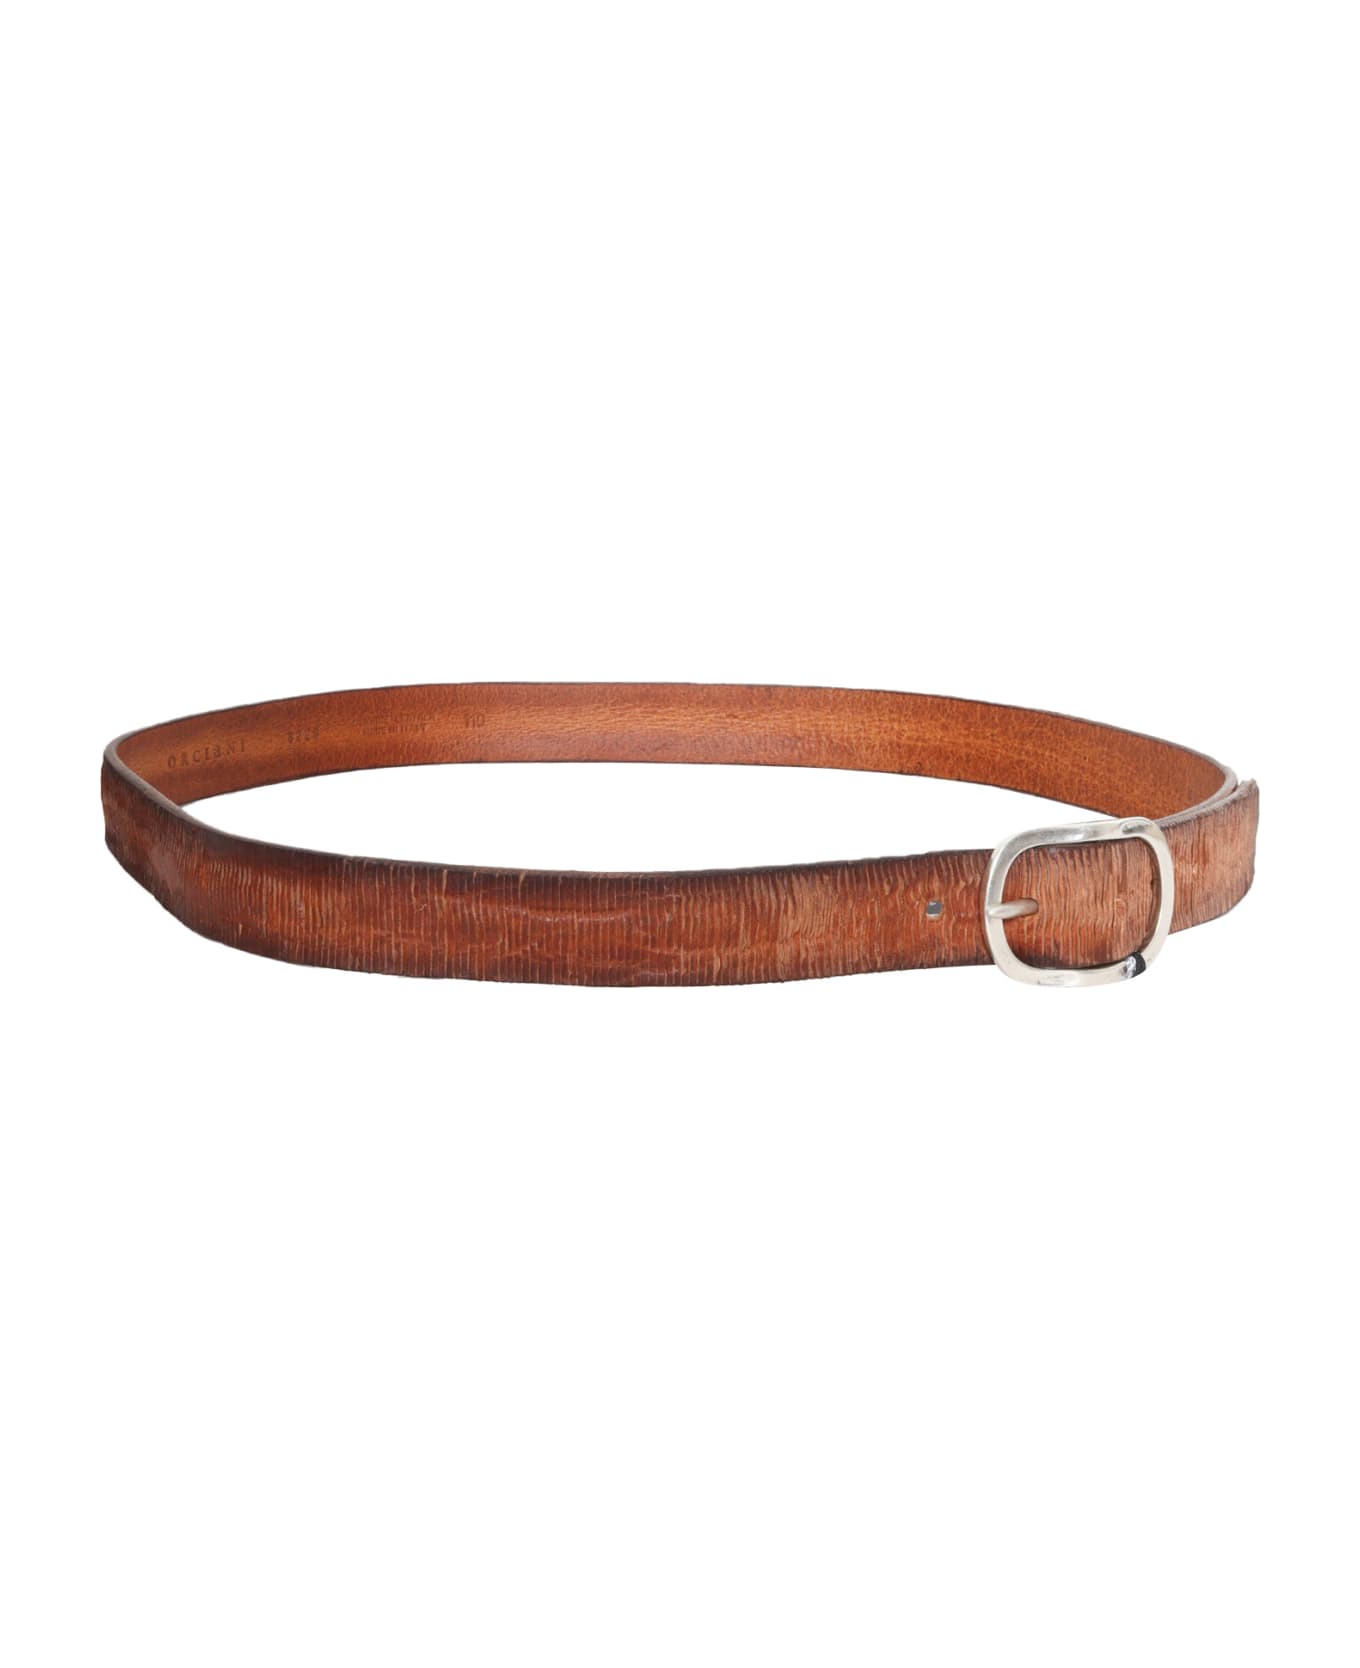 Orciani Knurled Belt - BROWN